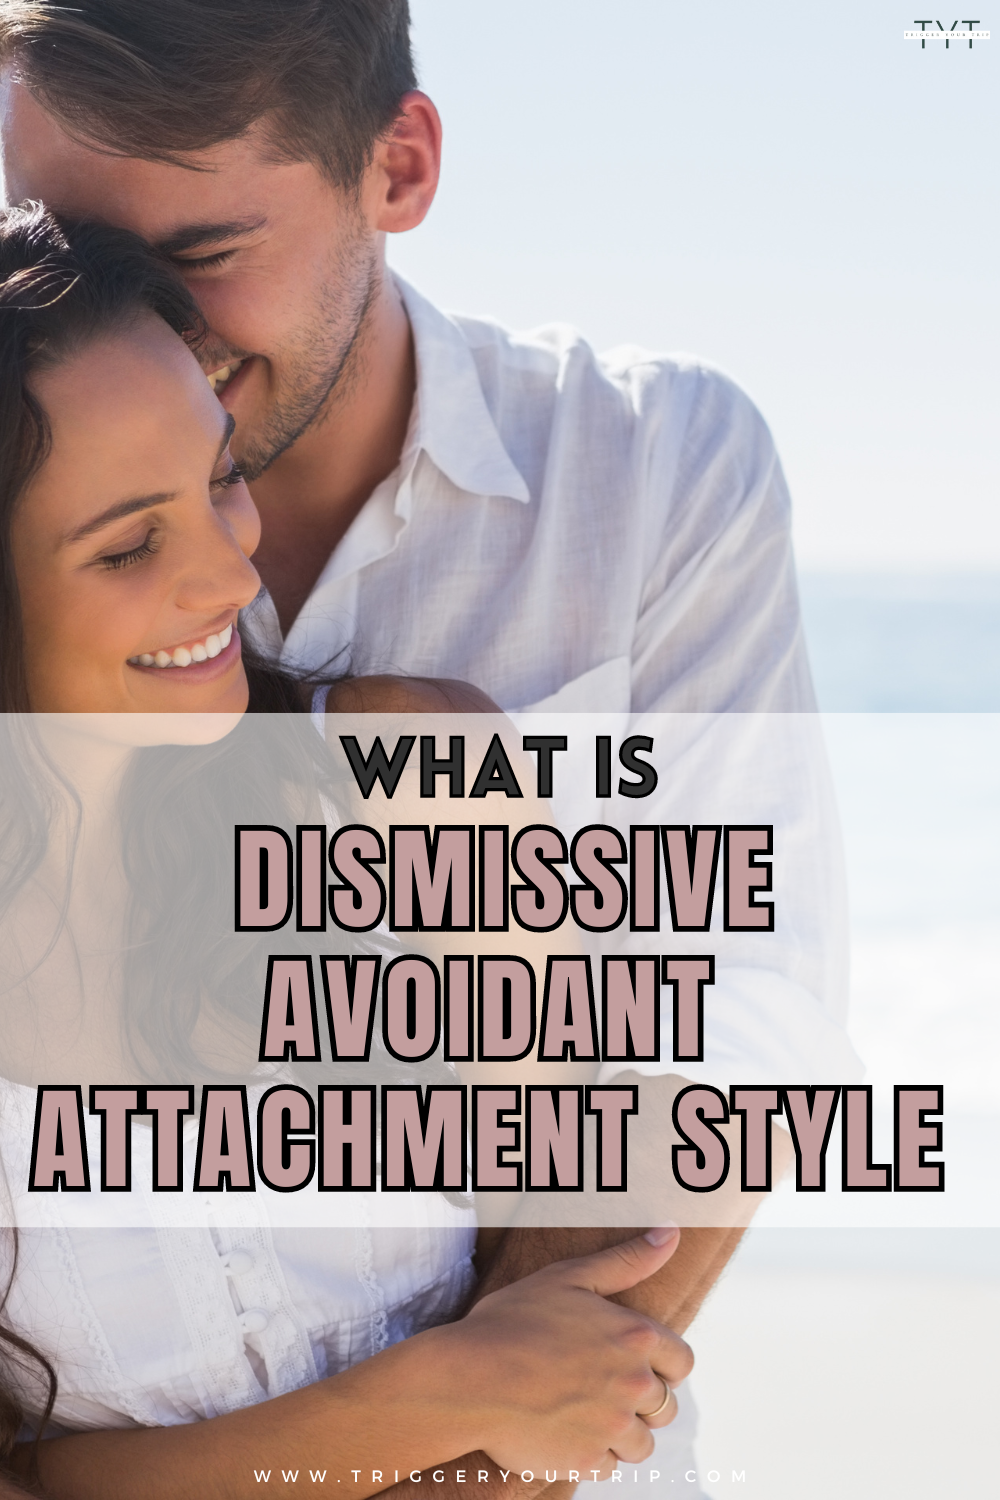 how does avoidant attachment develop and how can someone with avoidant attachment maintain healthy relationships? 